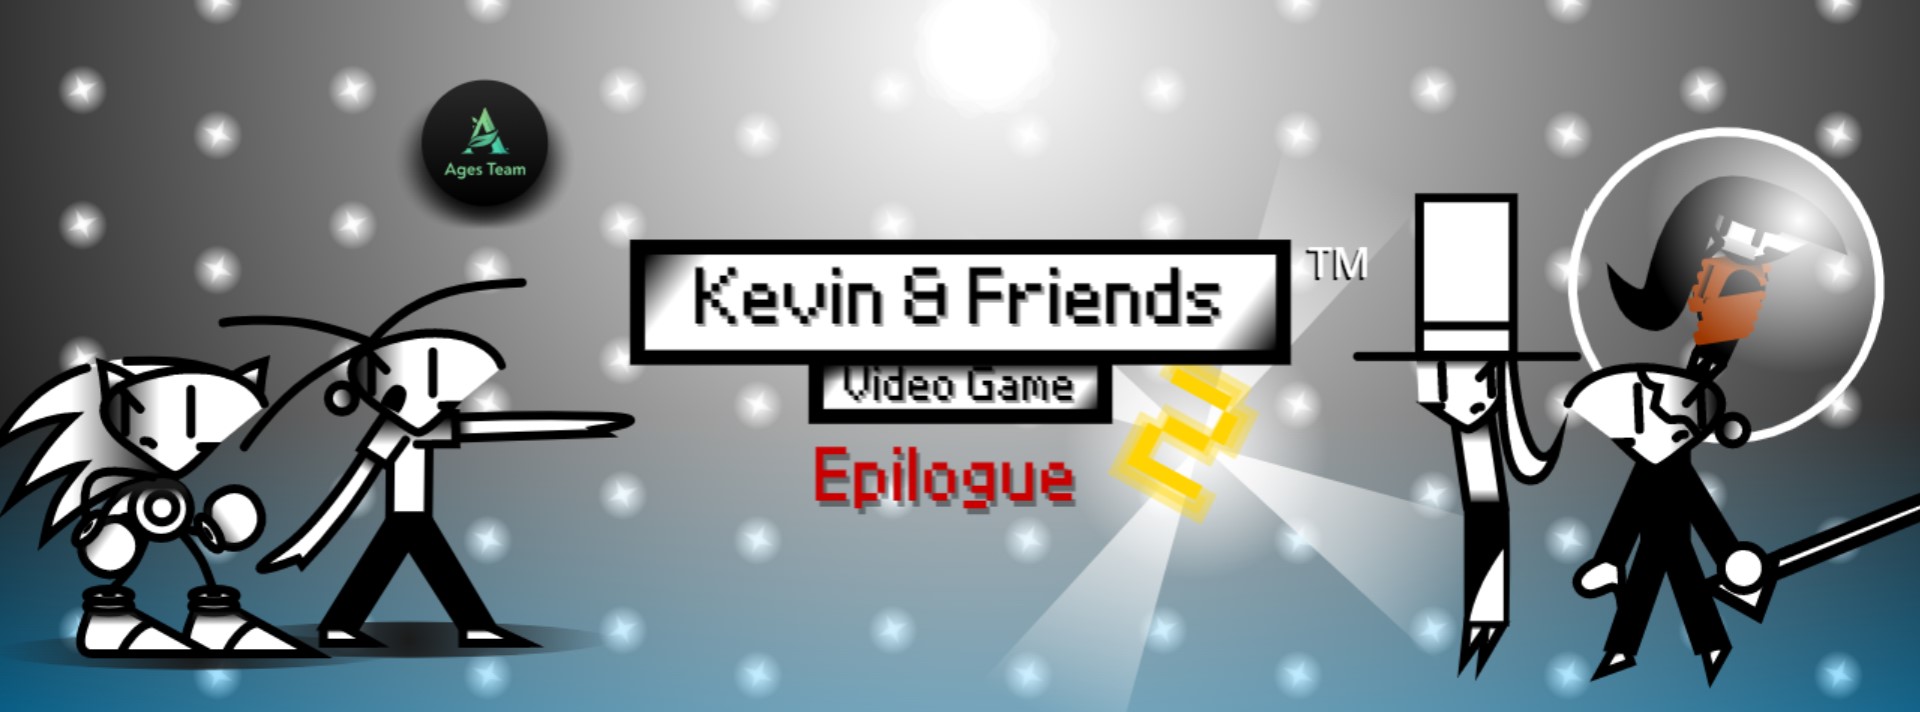 Kevin & Friends - Video Game 2: Epilogue